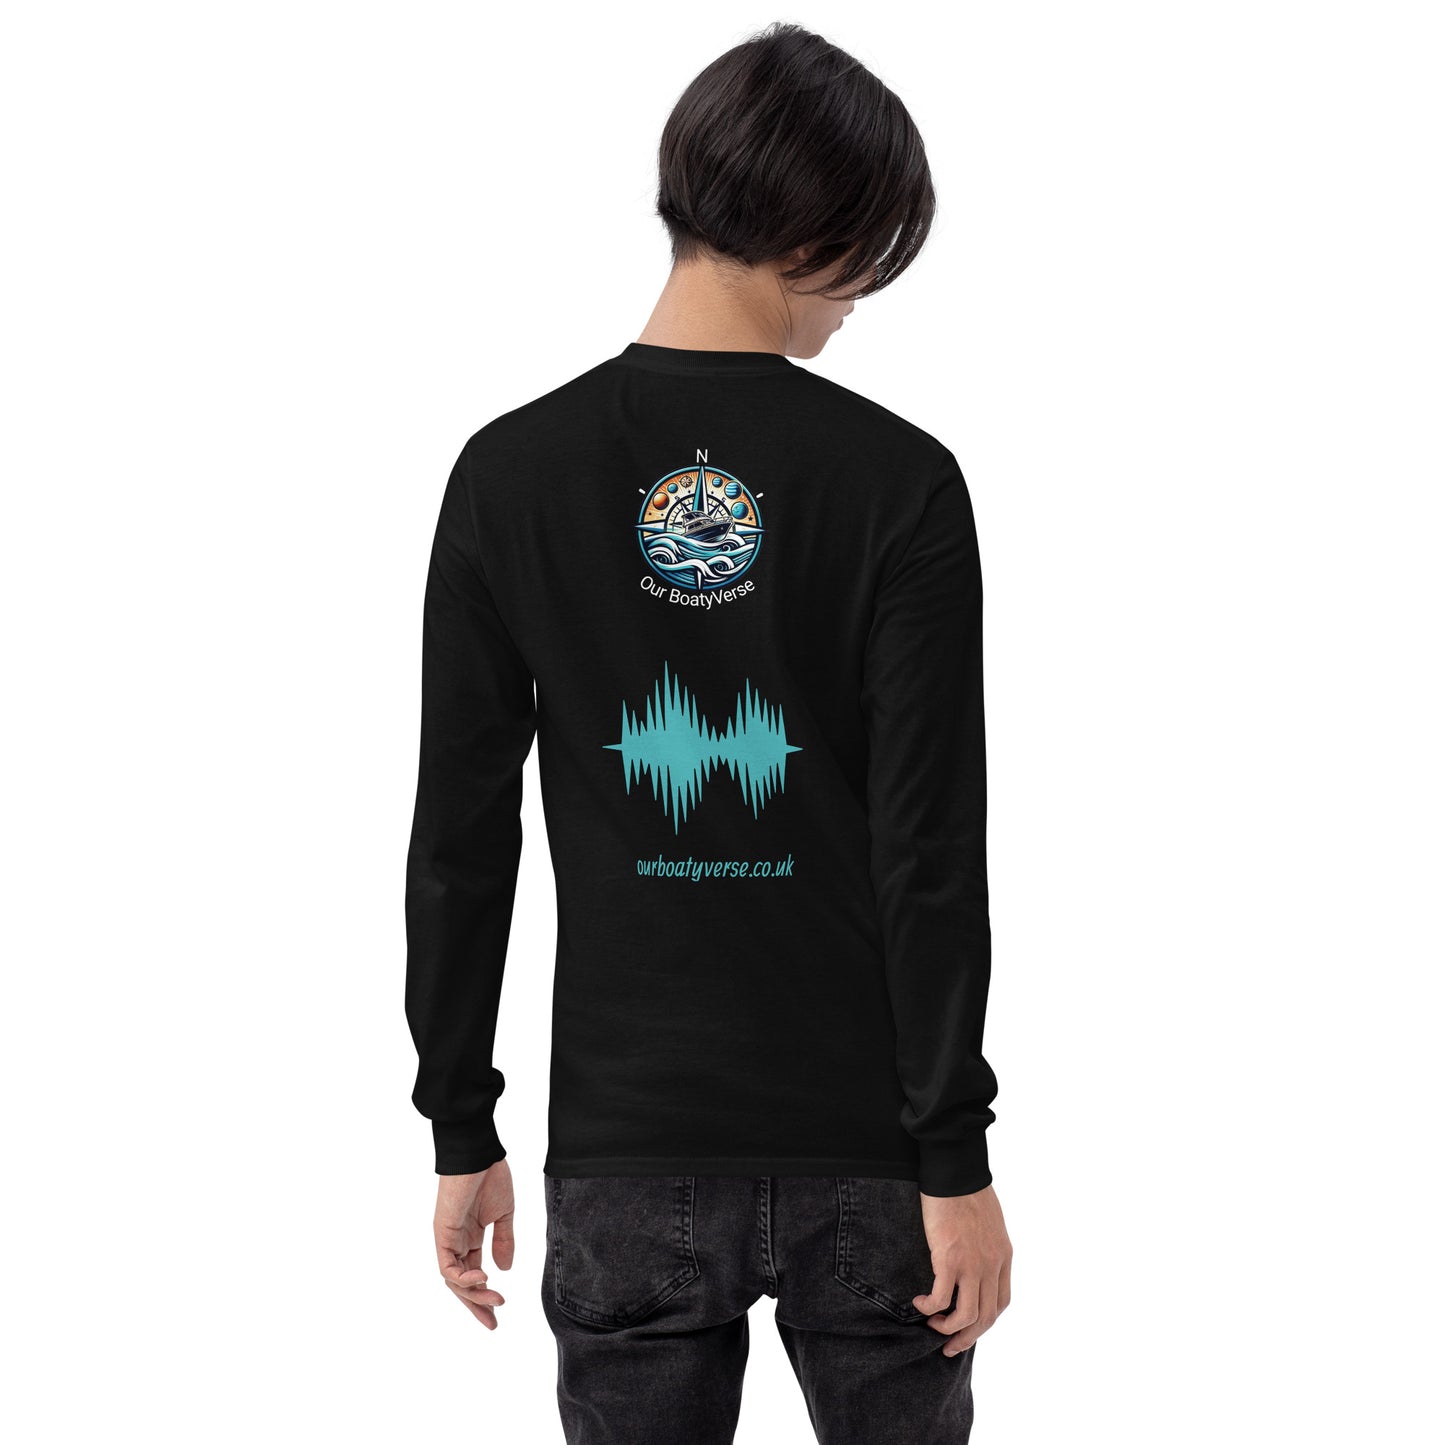 Sound's of the Ocean Men’s Long Sleeve Cotton Shirt by Our BoatyVerse